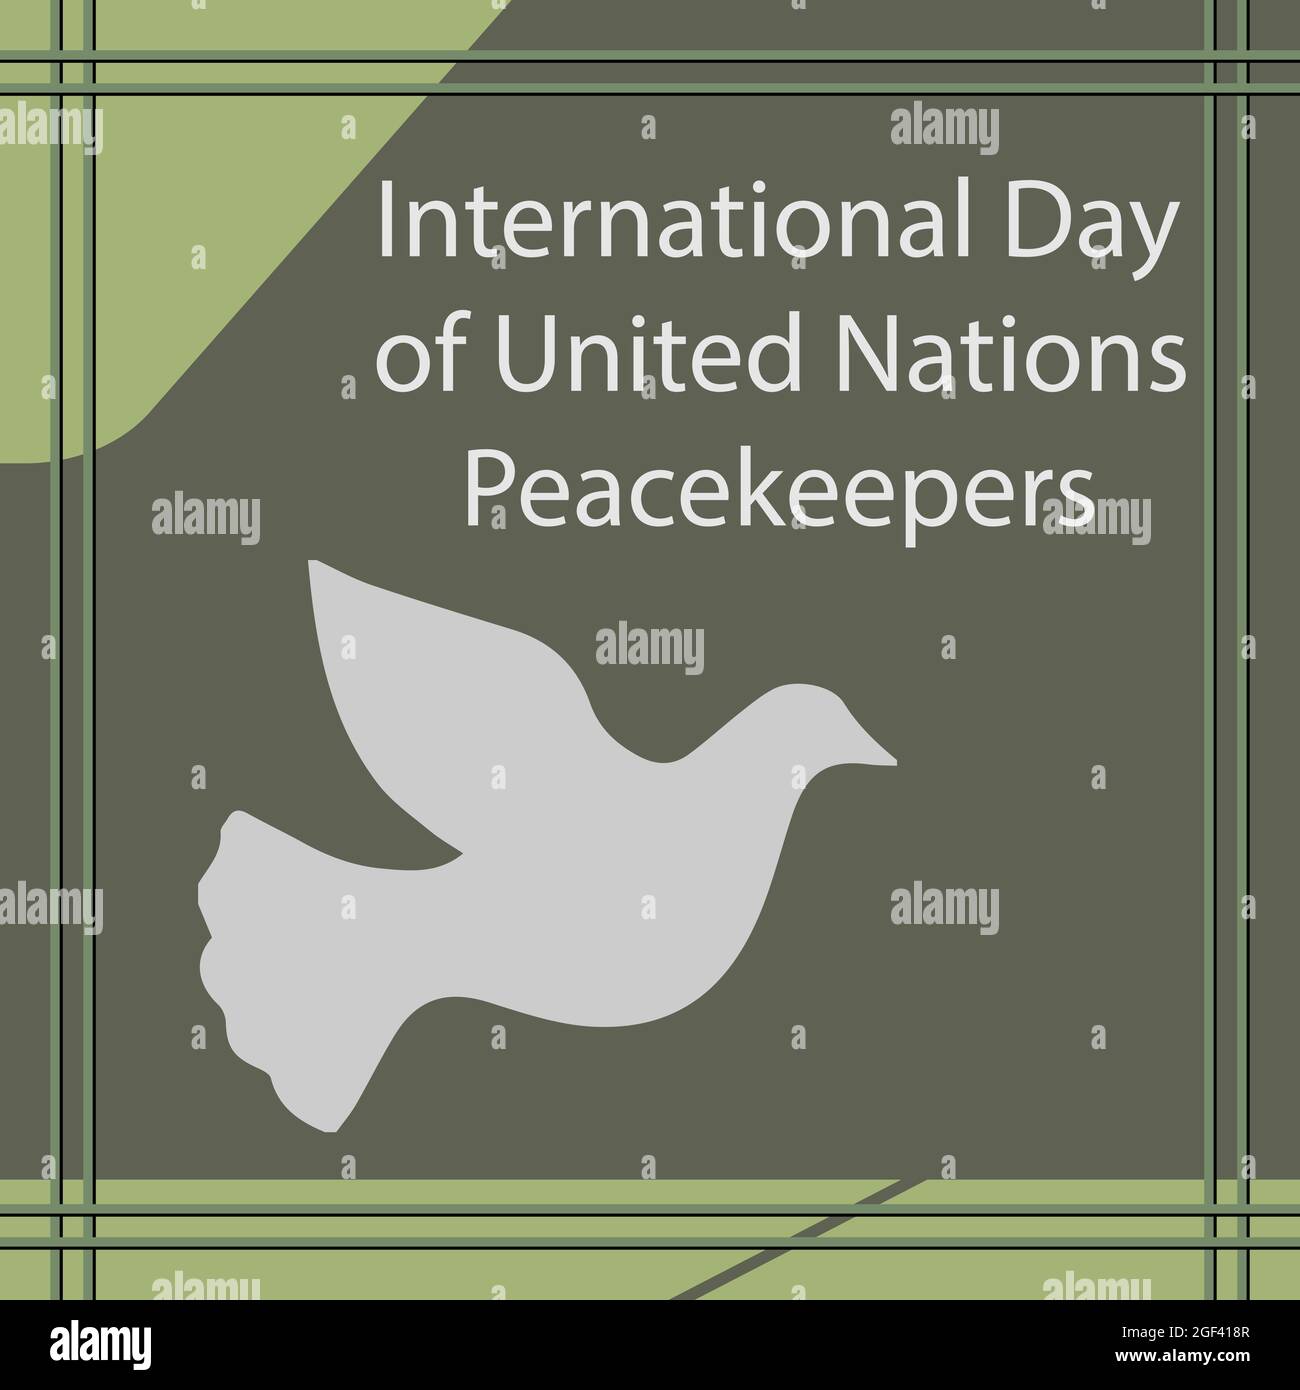 International Day of United Nations Peacekeepers. Stock Vector